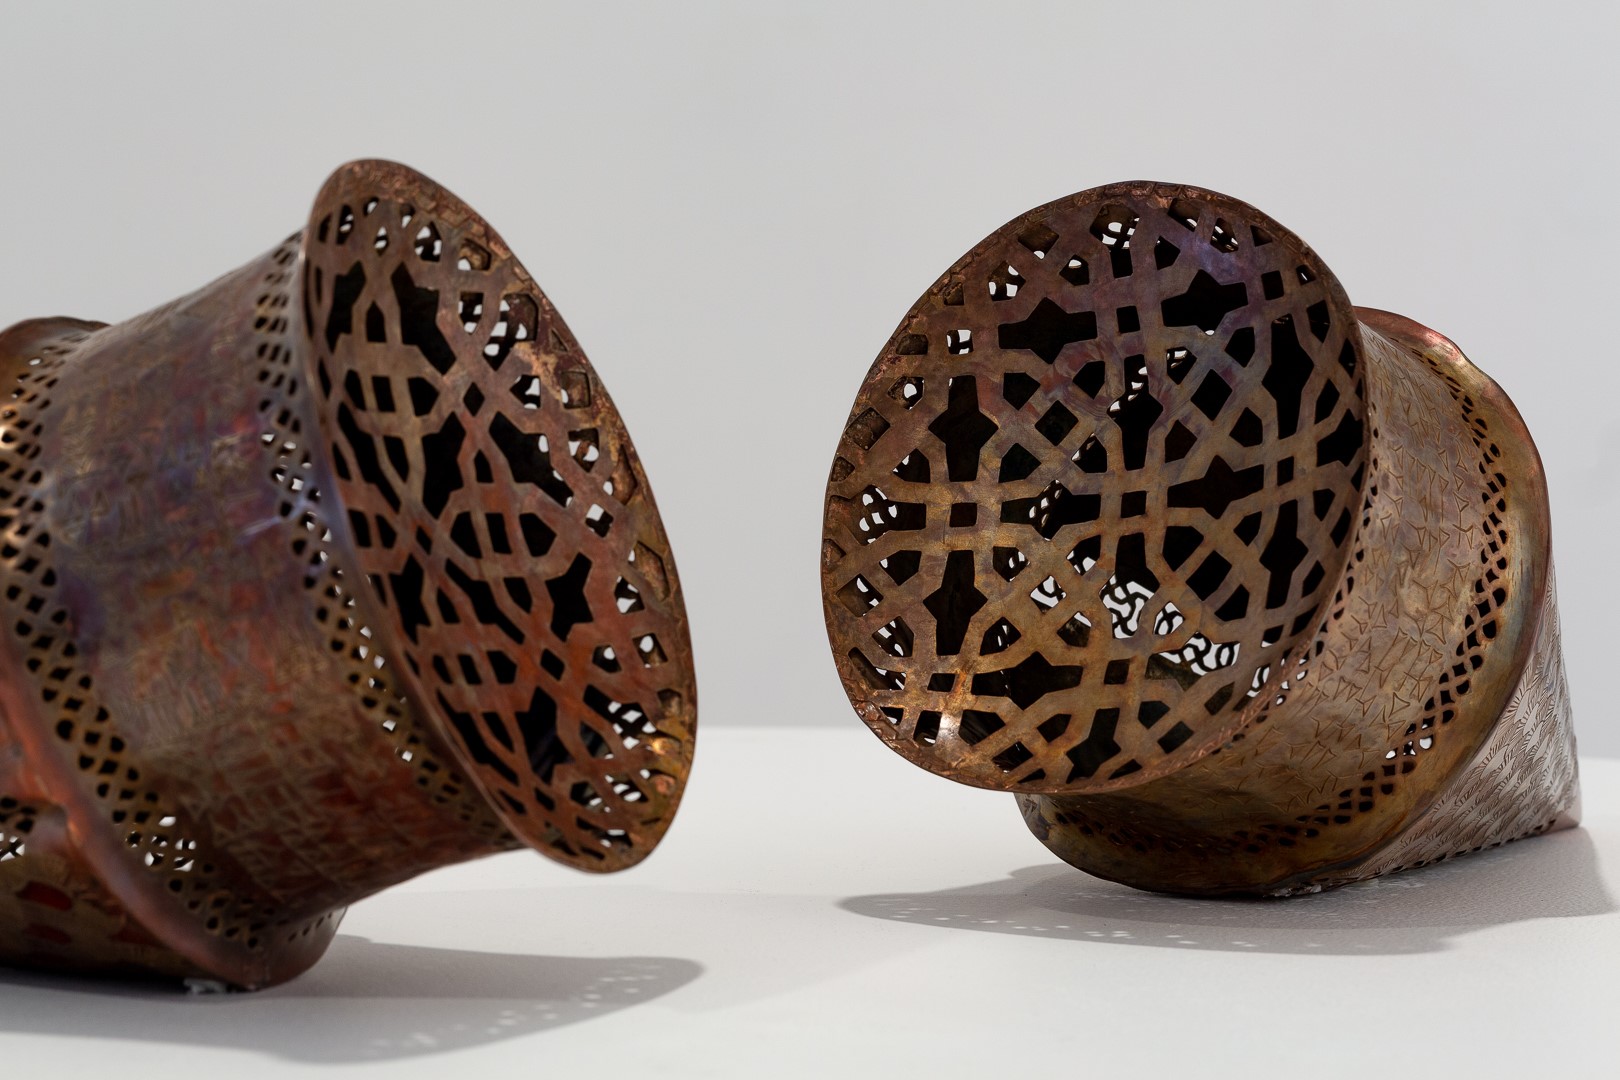 Sculptures of Pierced and Engraved Copper pieces by Shireen Taweel